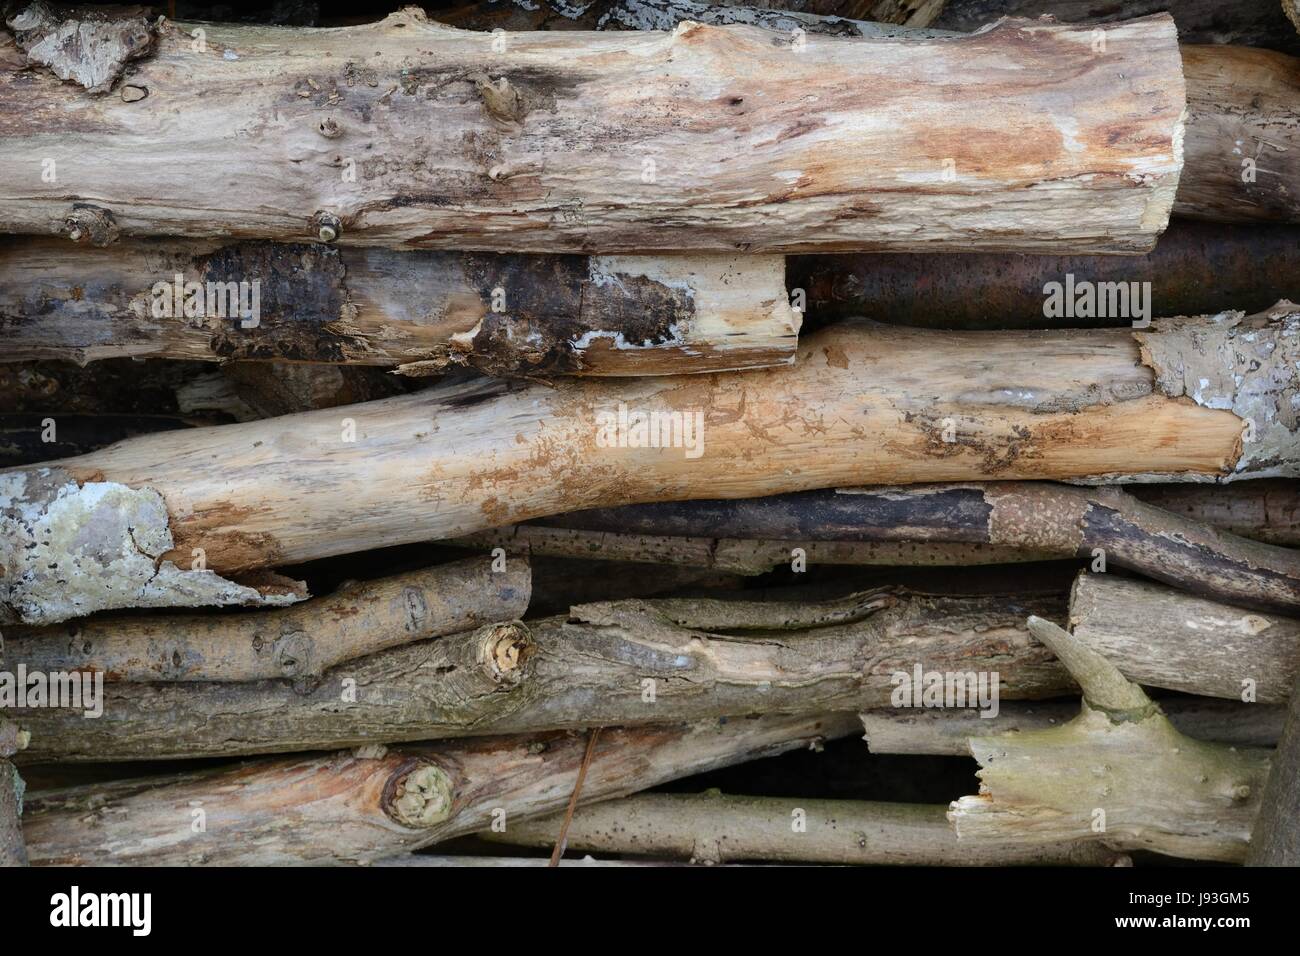 wood, tribes, wall, fence, fence in, fencing, provisional, stratified, tree, Stock Photo